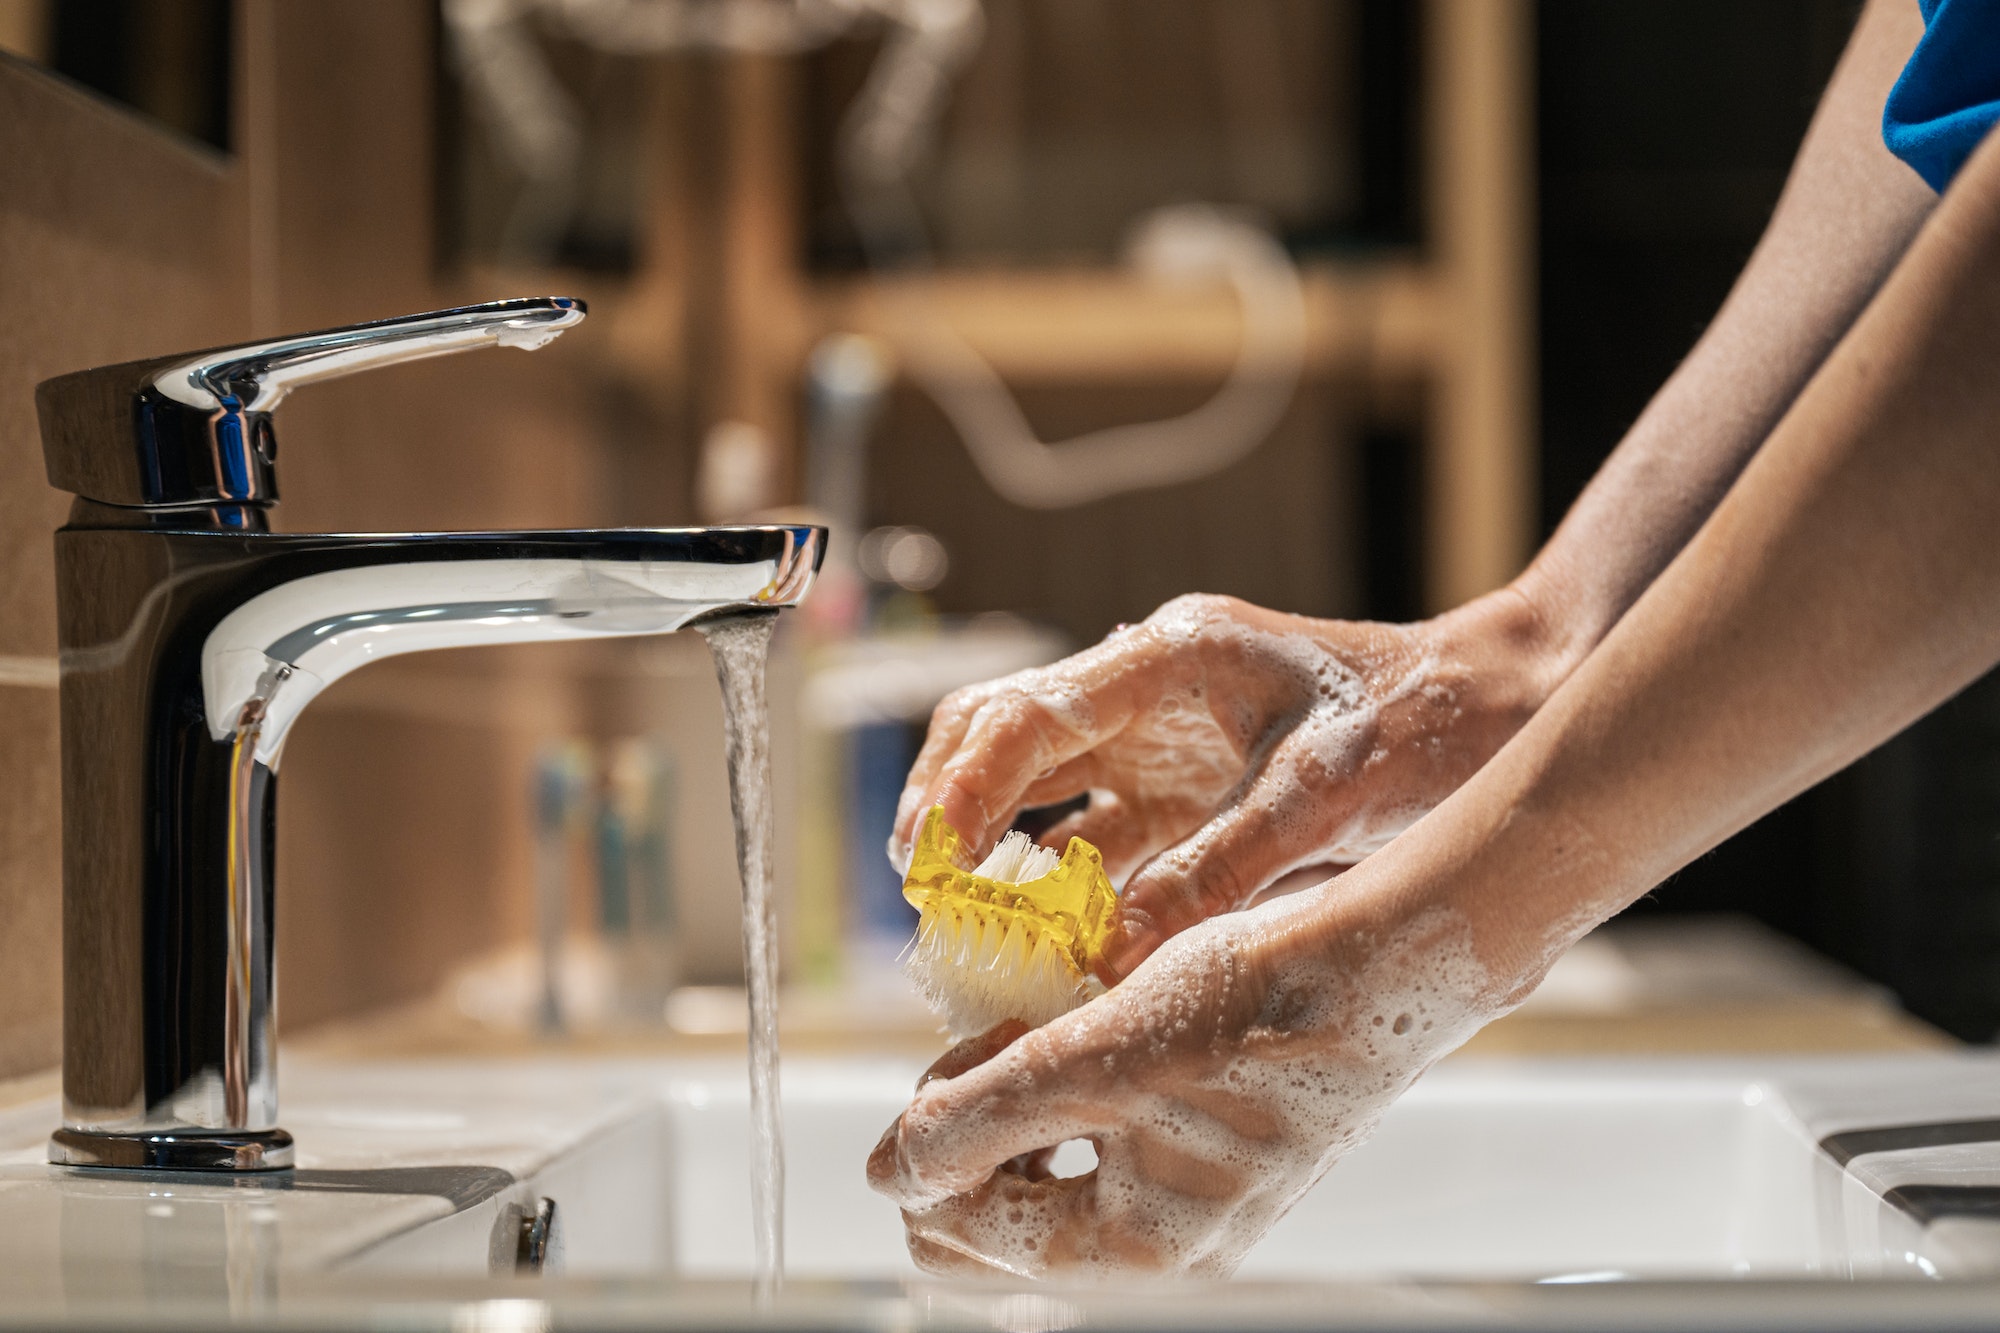 Closeup view of a woman washing her hands with soap and brush